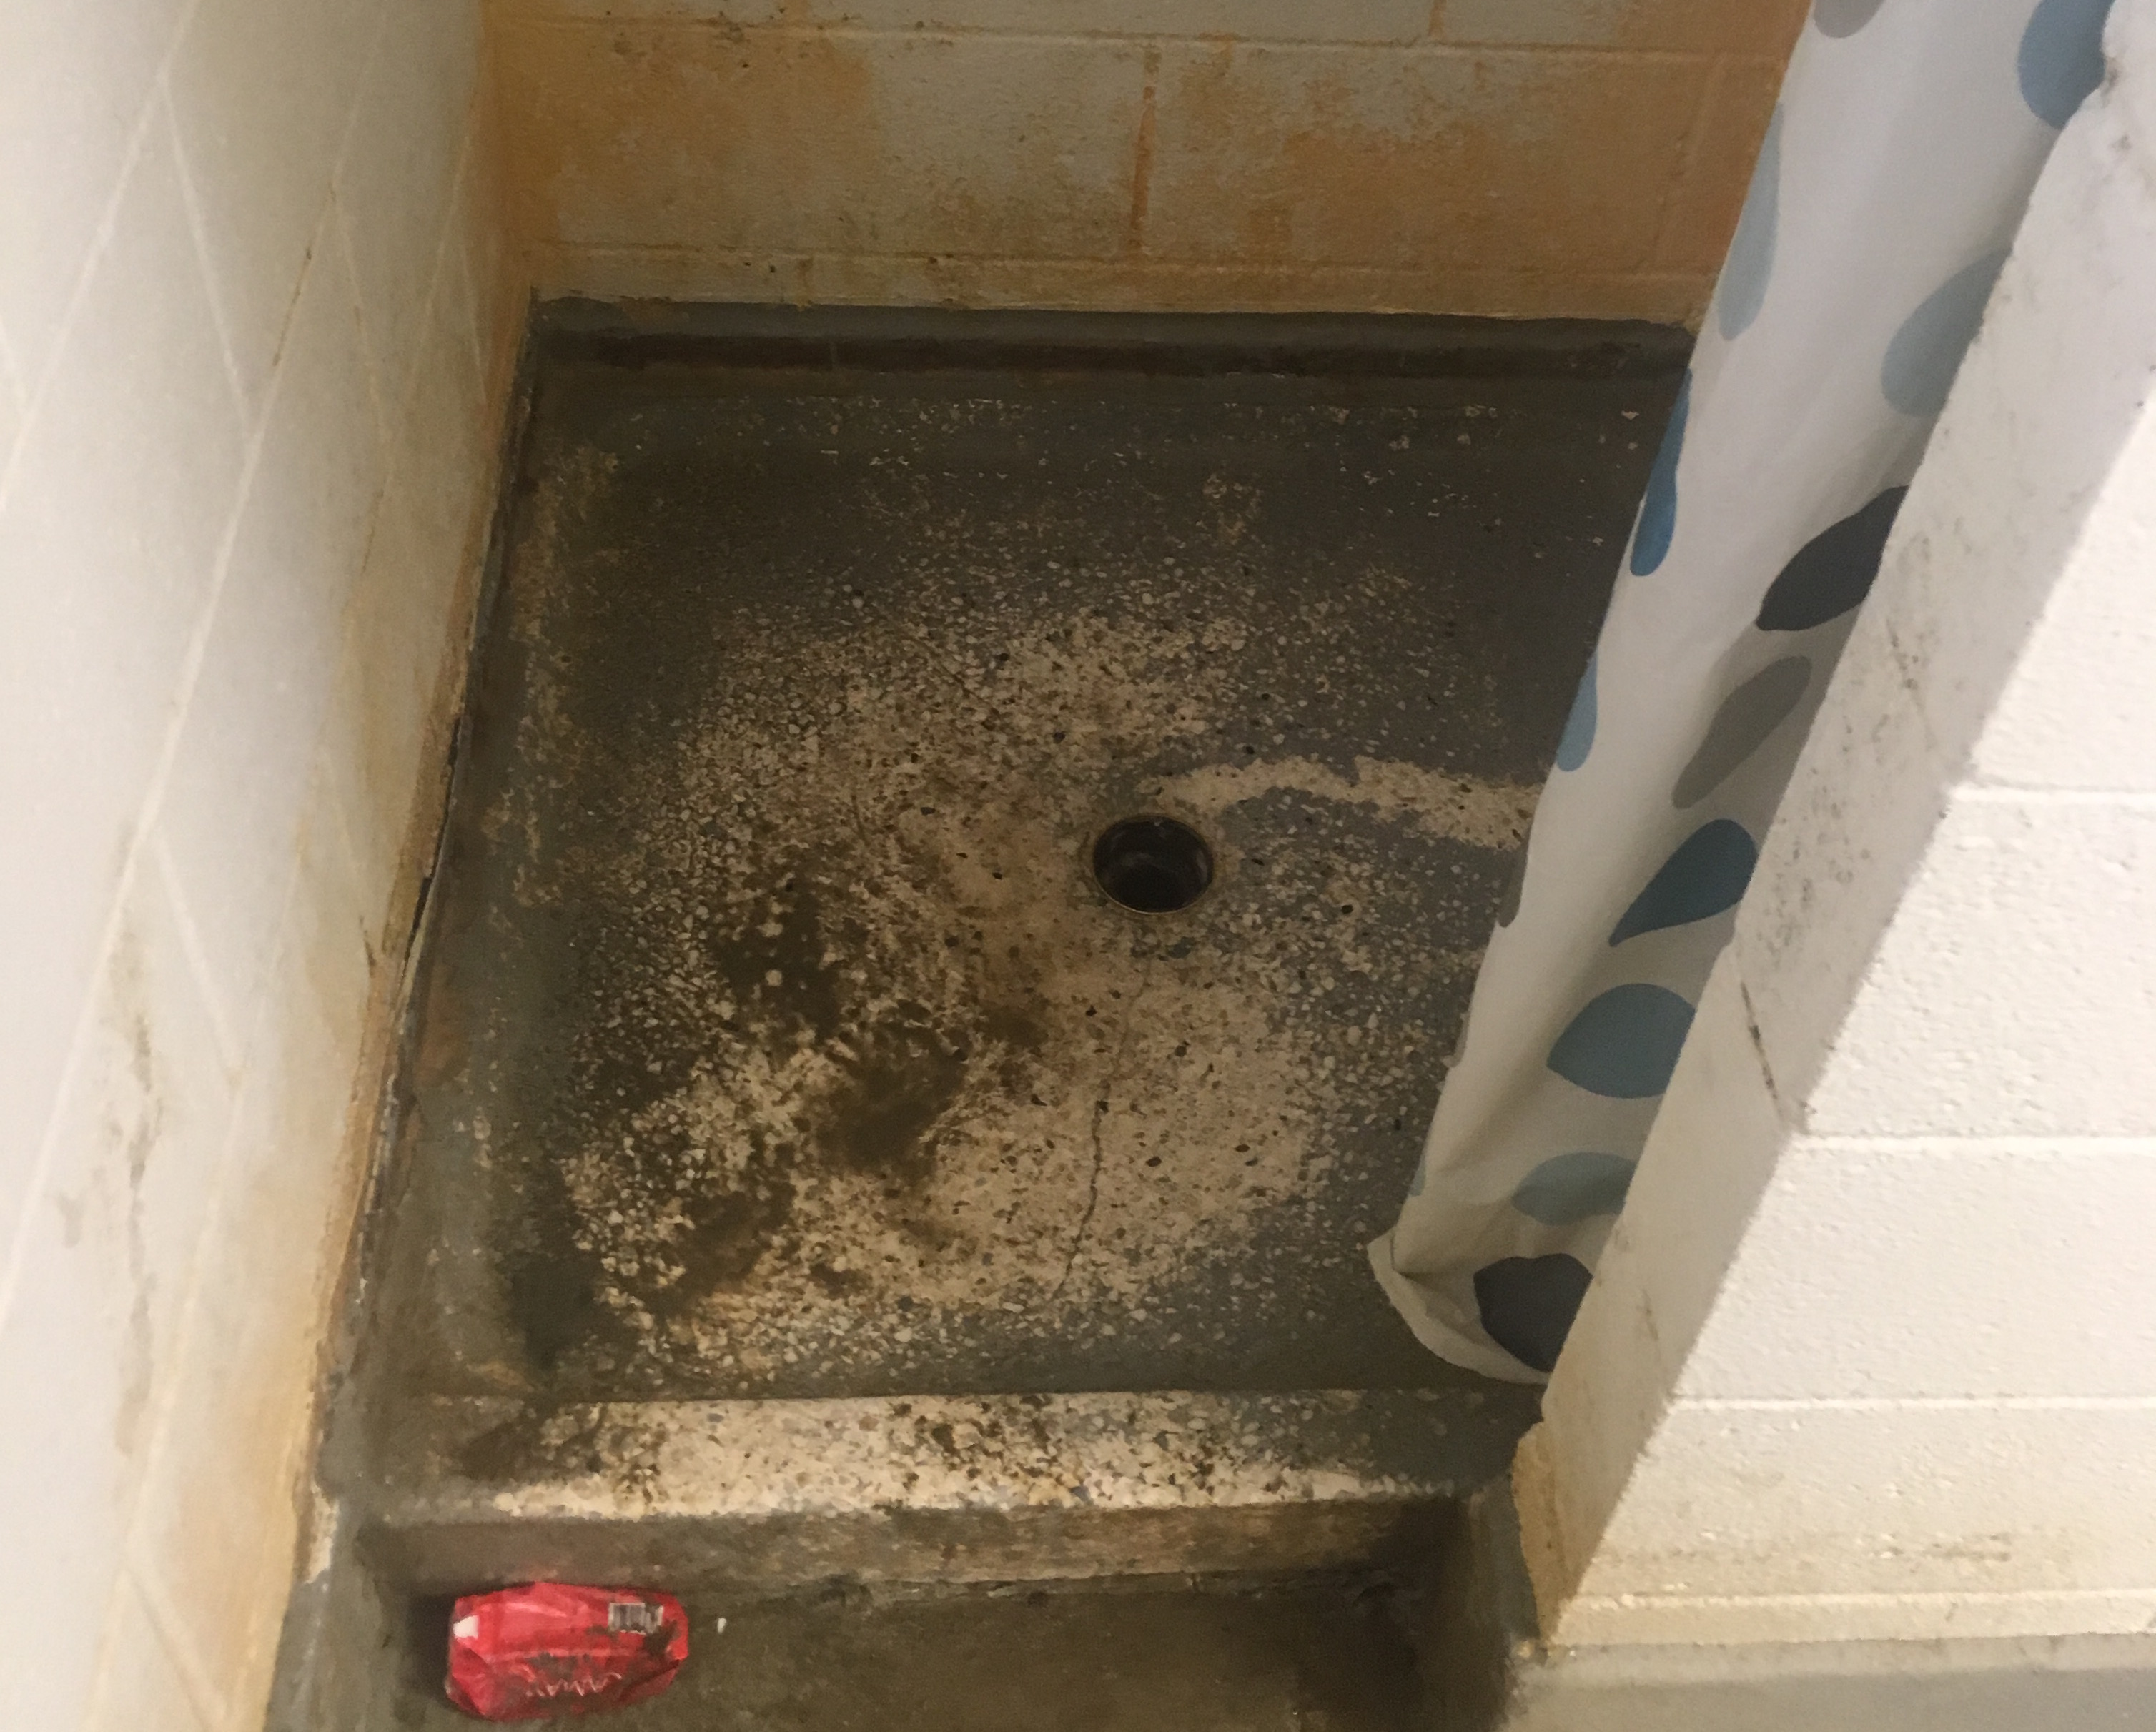 A shower in one of the bathrooms shared by backstretch workers at Santa Anita. This picture was also taken last weekend. Photo: Daniel Ross